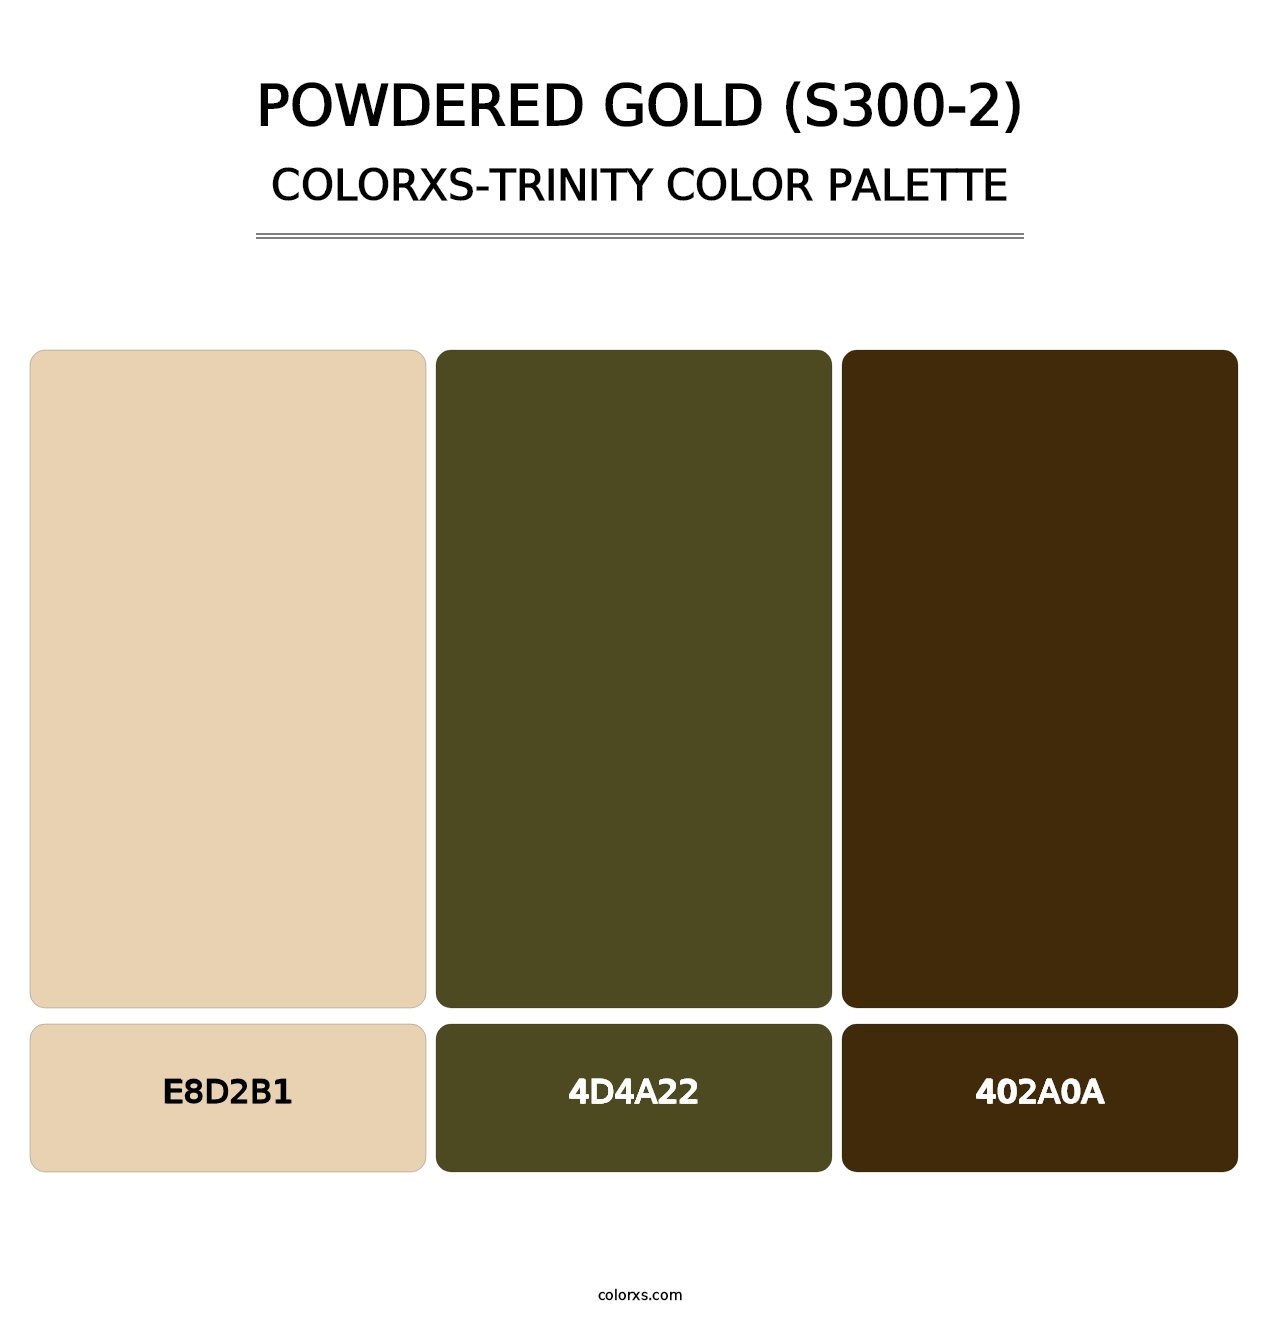 Powdered Gold (S300-2) - Colorxs Trinity Palette